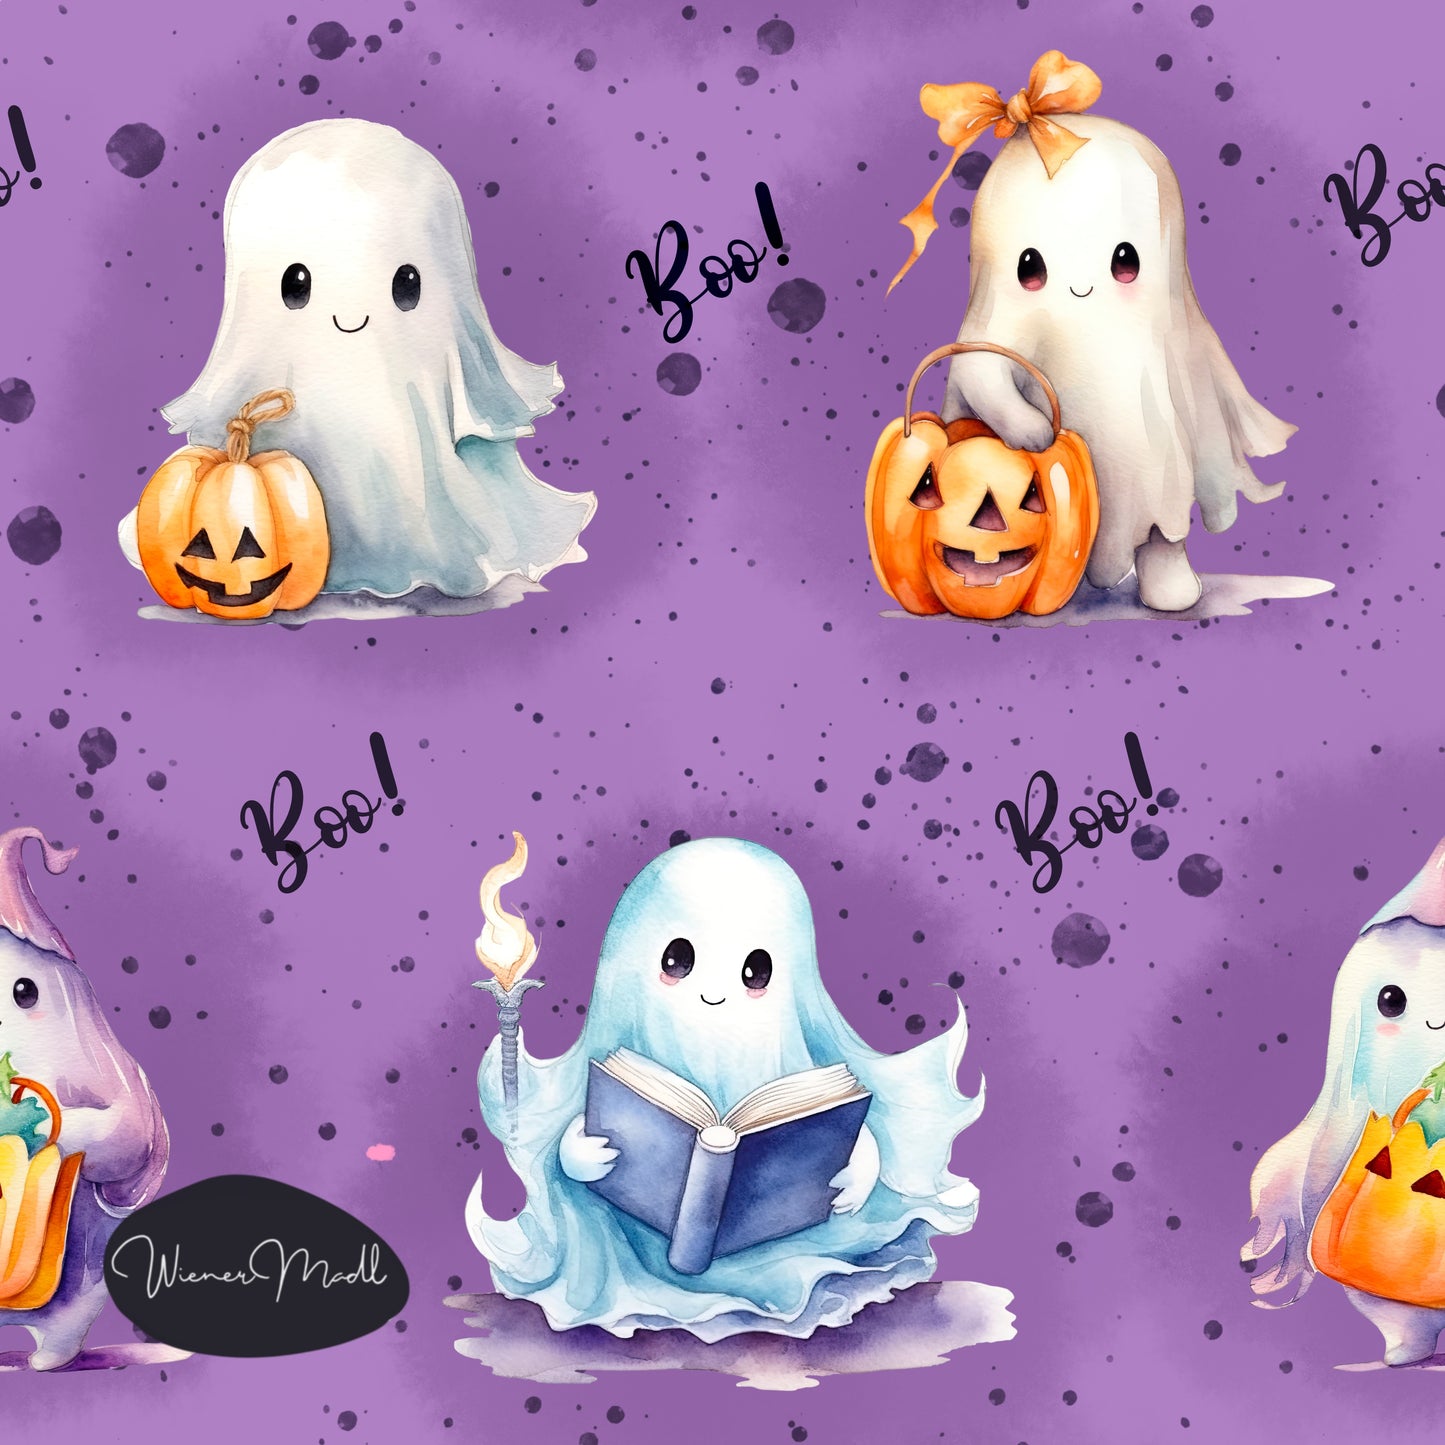 seamless repeat pattern -boo! ghosts- exclusive graphic design